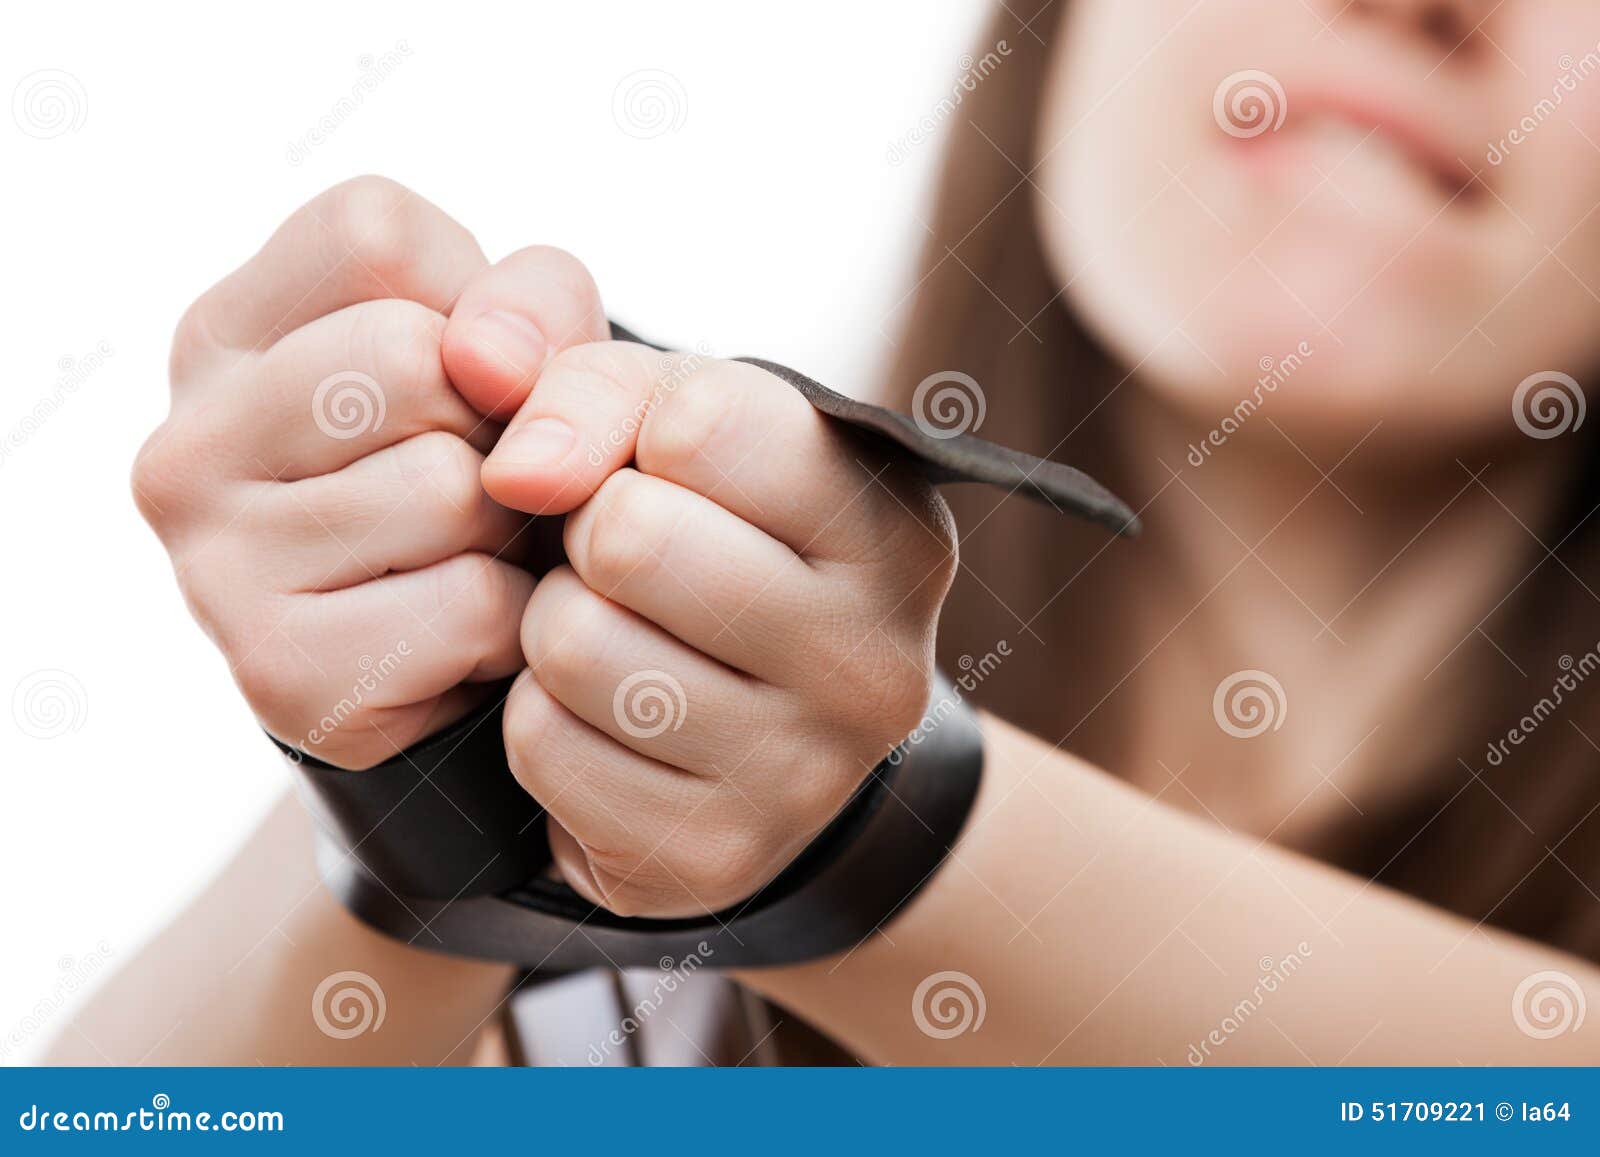 Beauty Adult Passionate Woman with Leather Belt Strap Tied Hands Stock Image